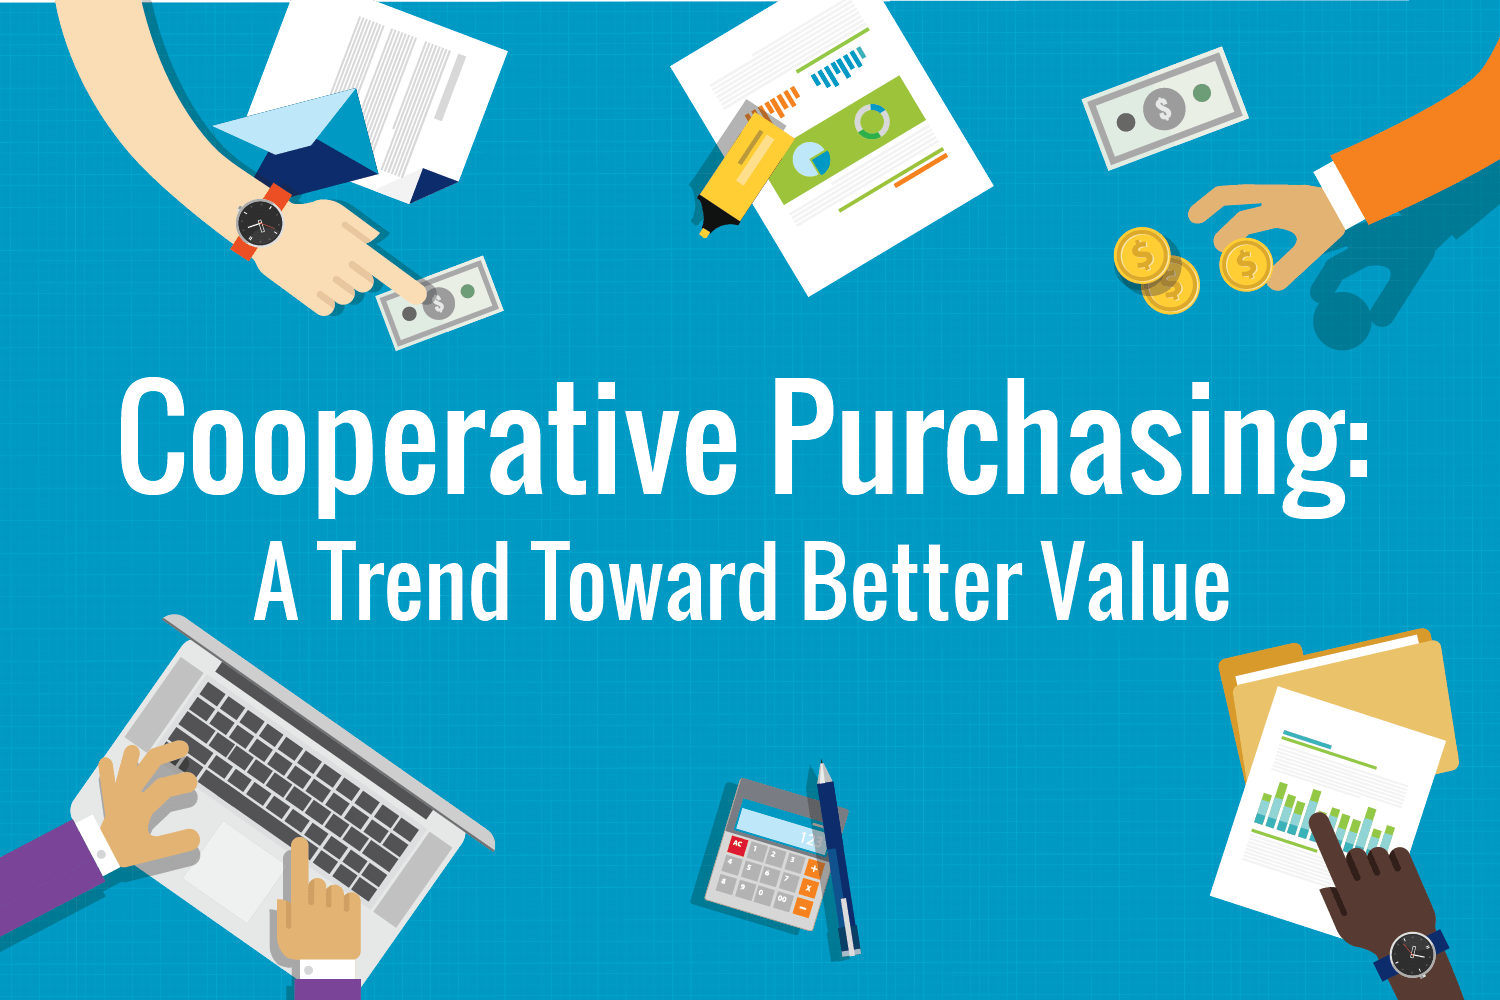 resource-image-cooperative-purchasing-a-trend-toward-better-value